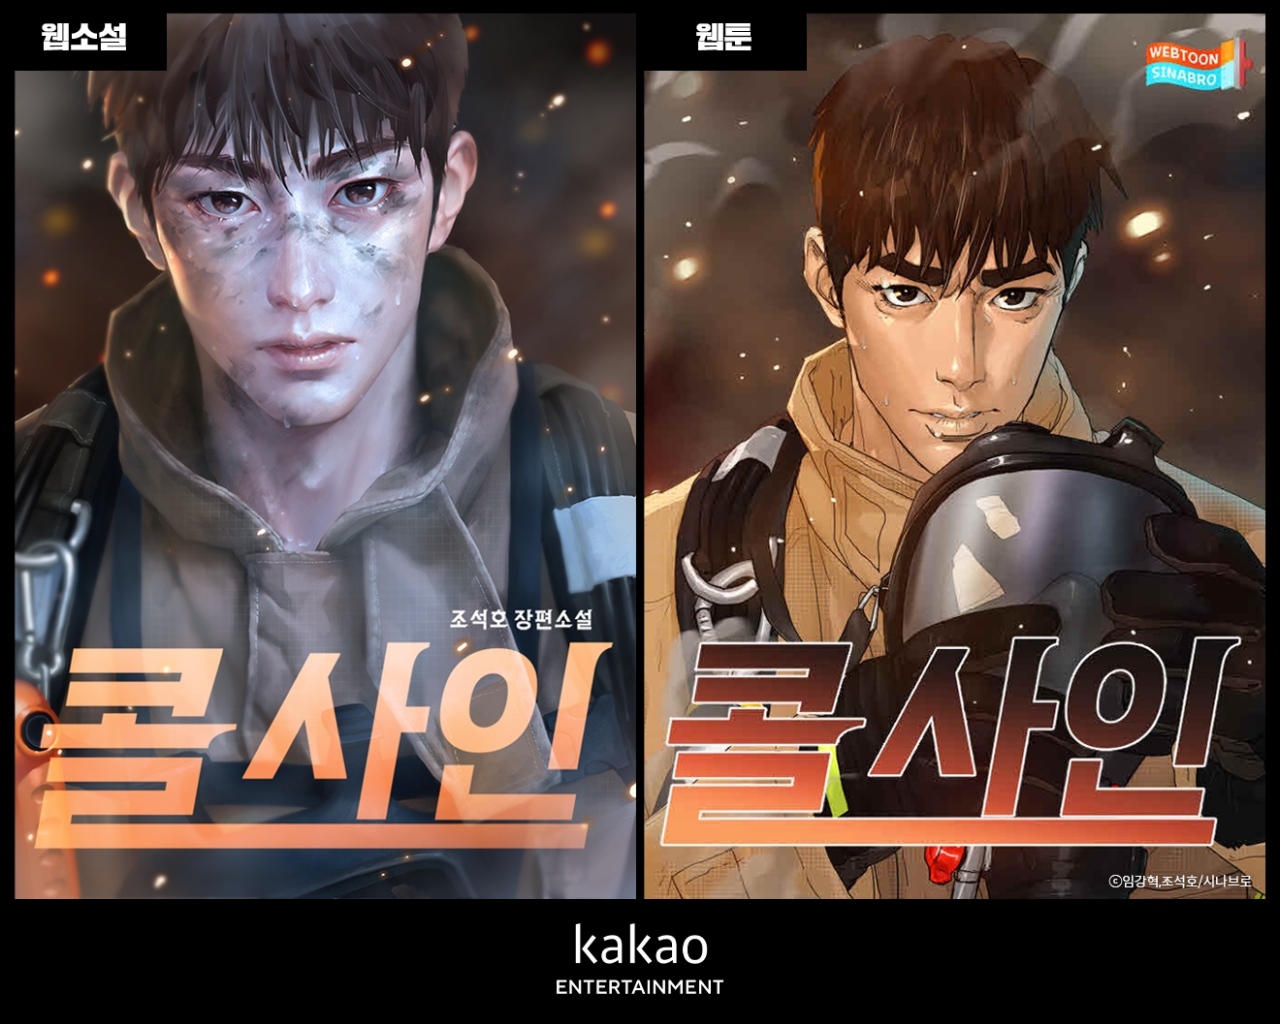 Cover images of the web novel (left) and webtoon versions of “Call Sign”